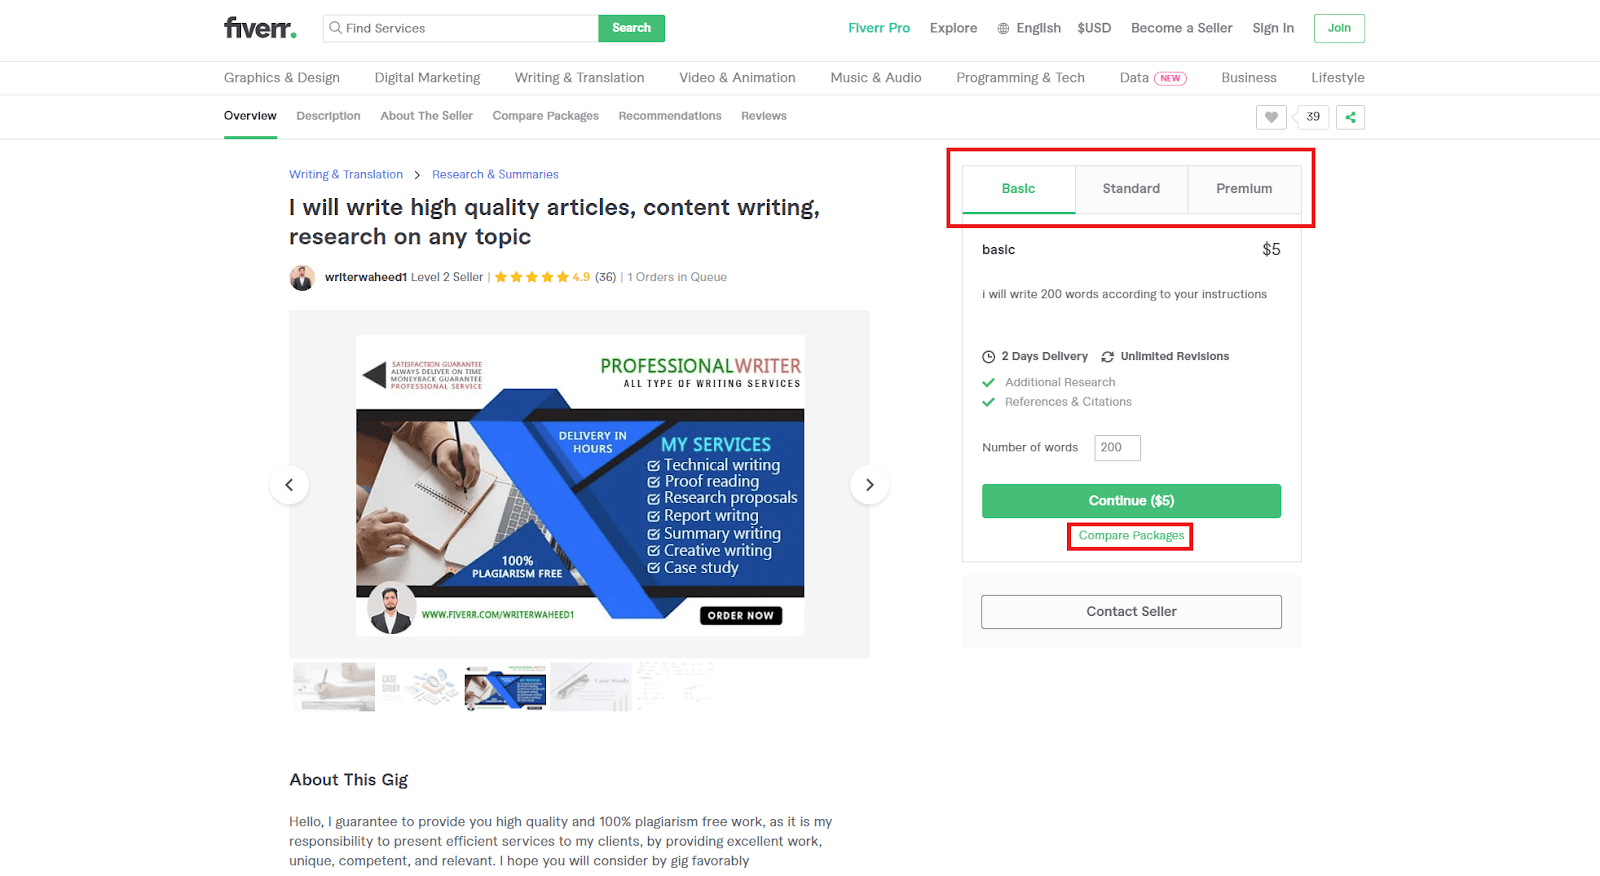 Fiverr screenshot - package tabs and compare packages button